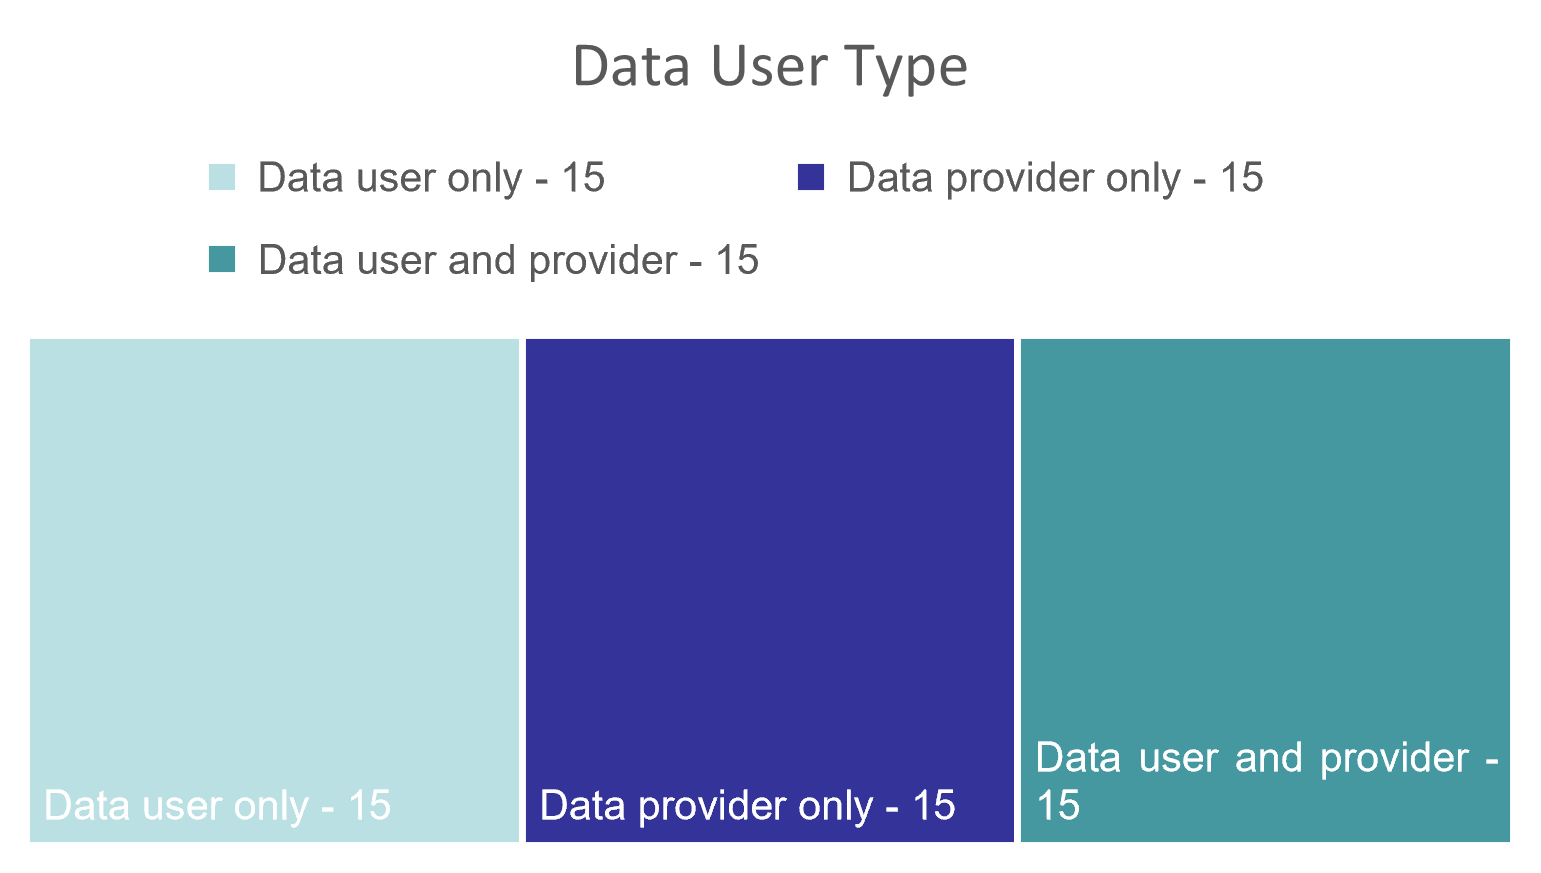 This chart shows the number individuals who were data users only, data providers only and data users and providers that filled in the questionnaire. There were 15 data providers, 15 data users and 15 data users and providers.